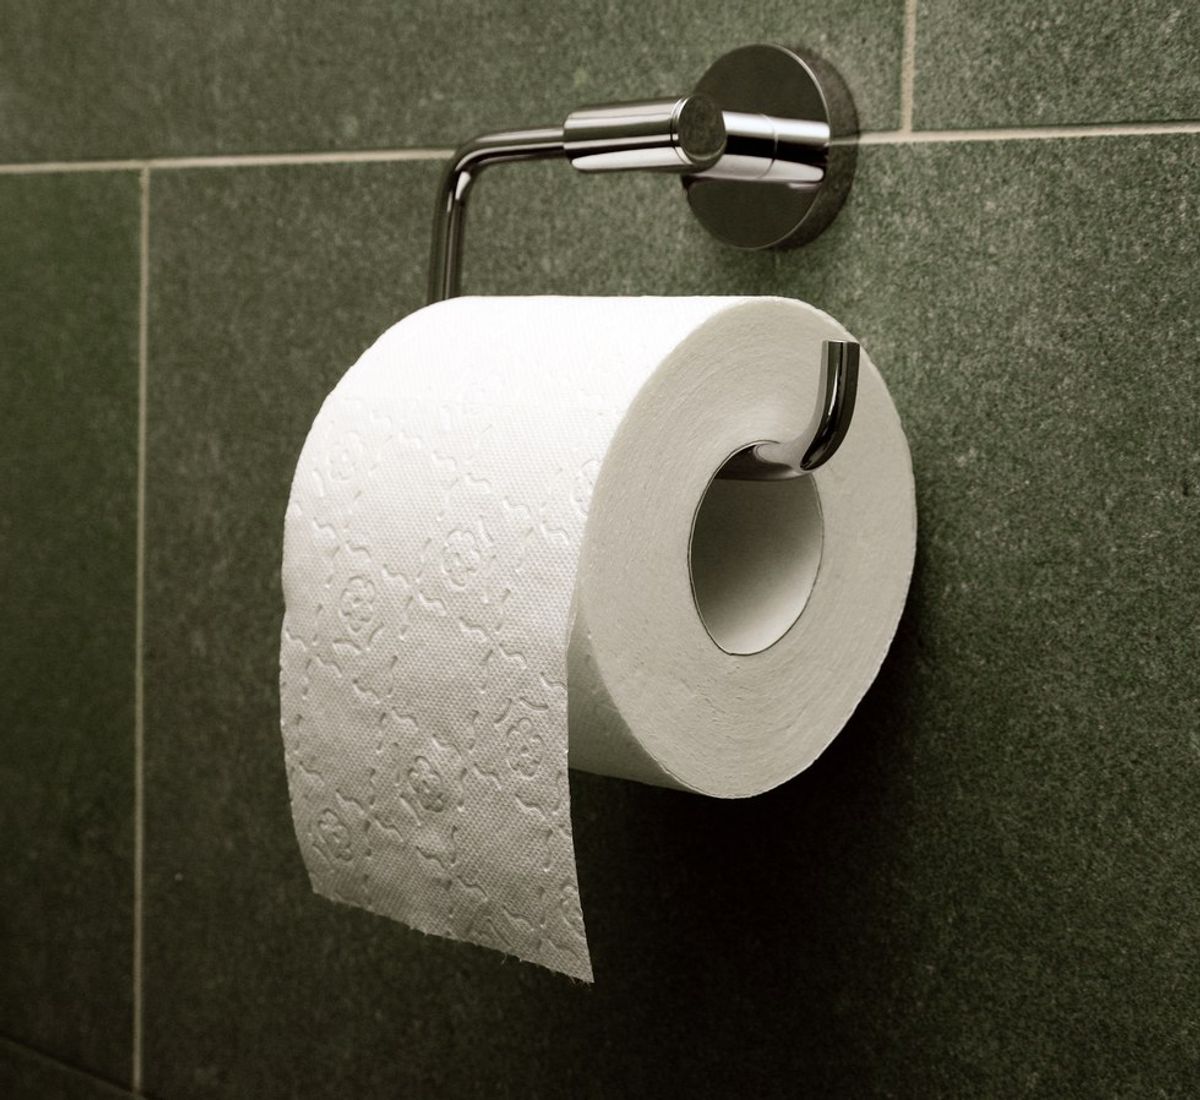 The Age Old Question: Should The Toilet Paper Roll Over Or Under